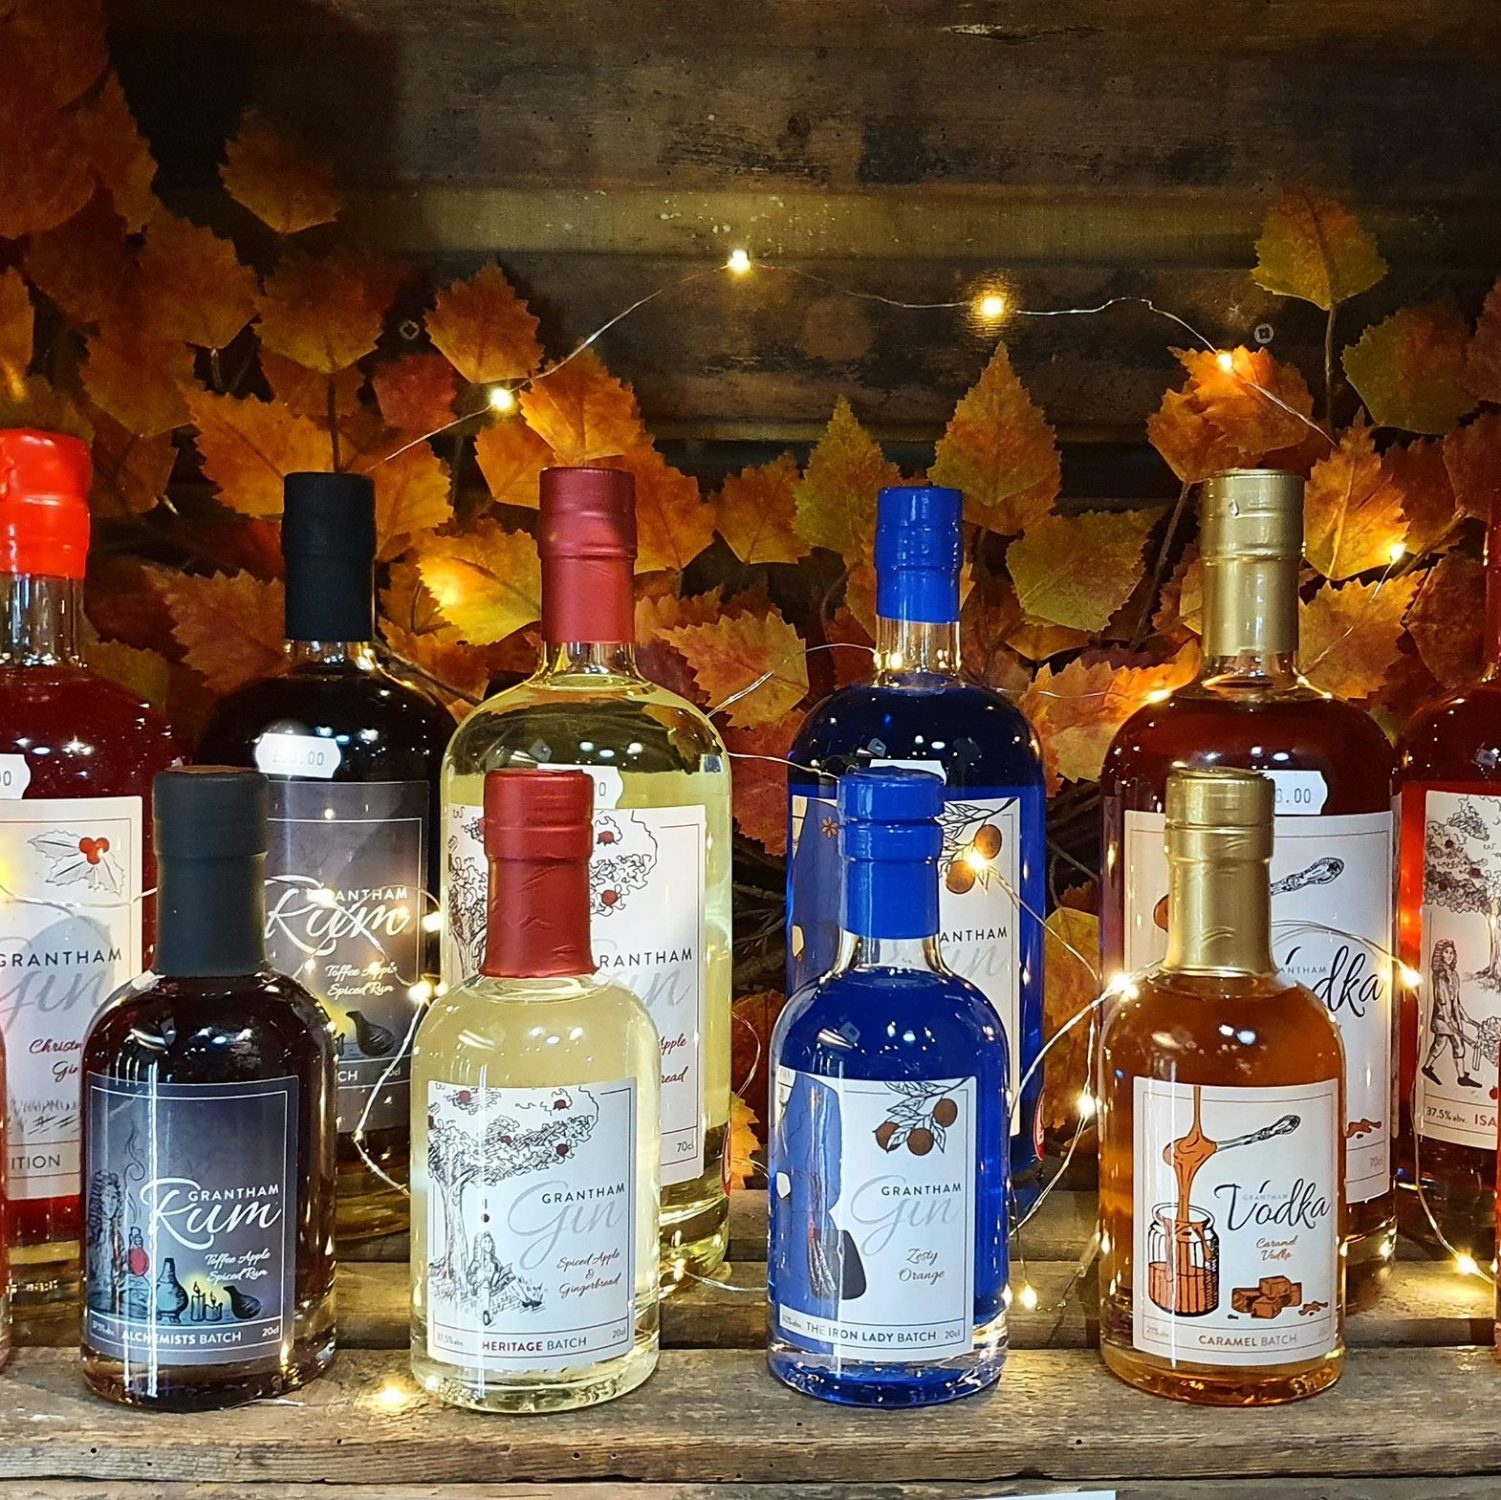 A selection of grantham gins, rum, vodka 